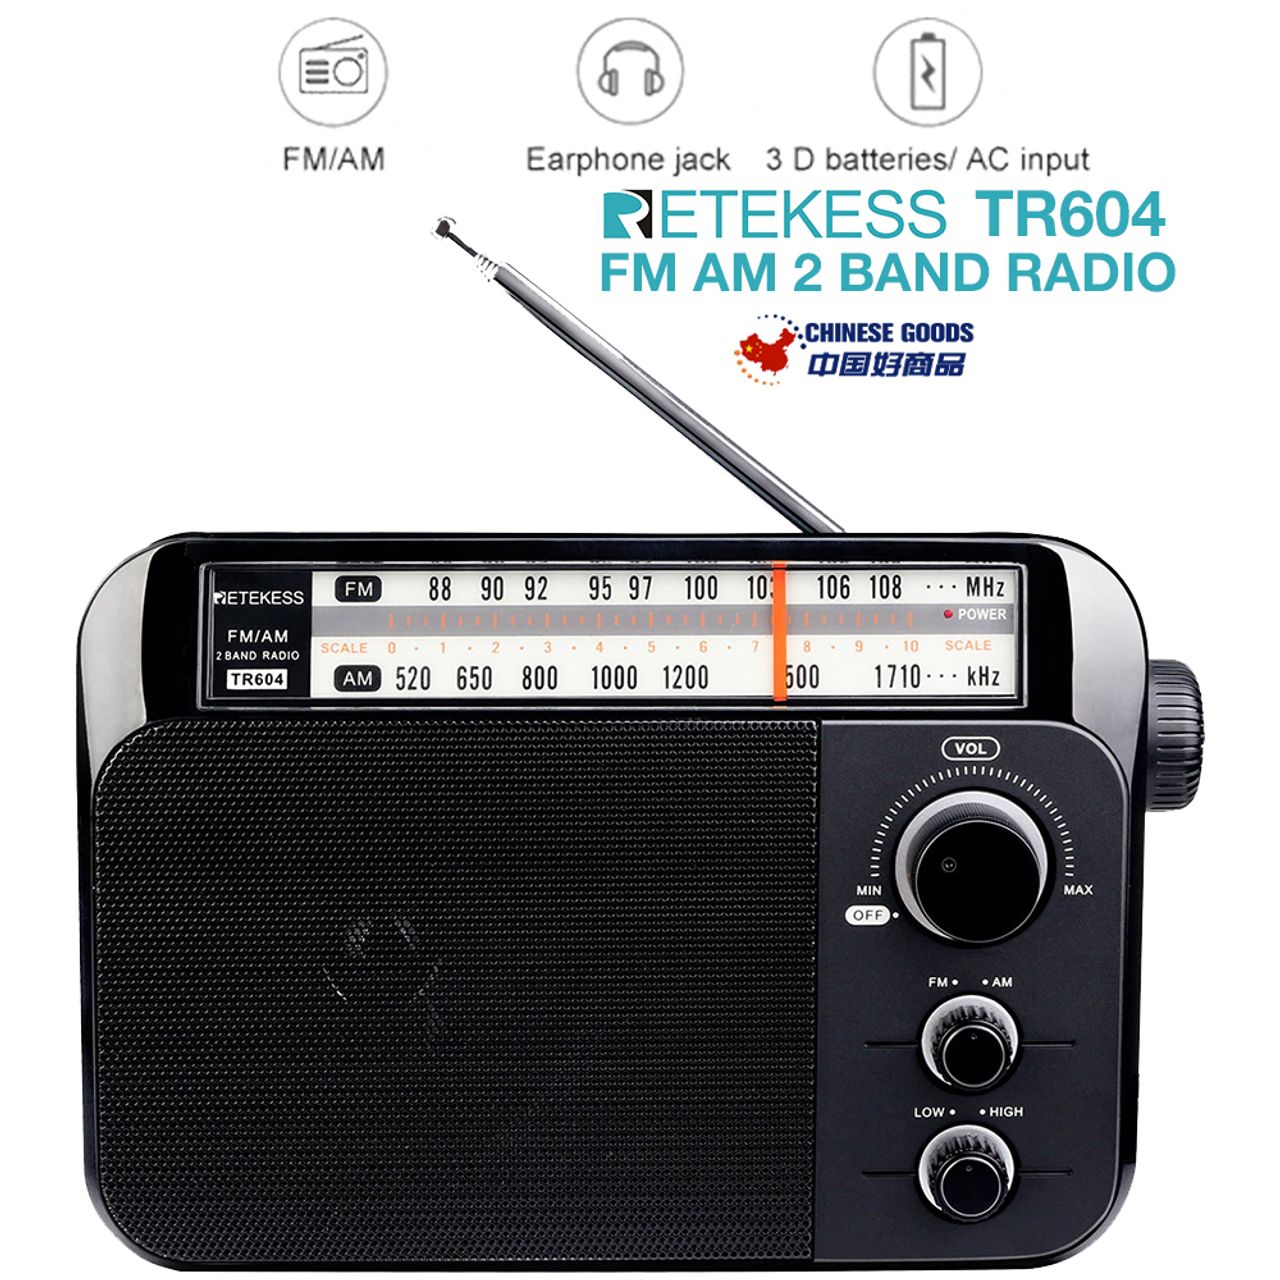 Retekess TR604 AM FM Radio Portable Transistor Analog Radio with 3.5mm Earphone Jack Battery Operated by 3 D Cell Batteries or AC Power Black 